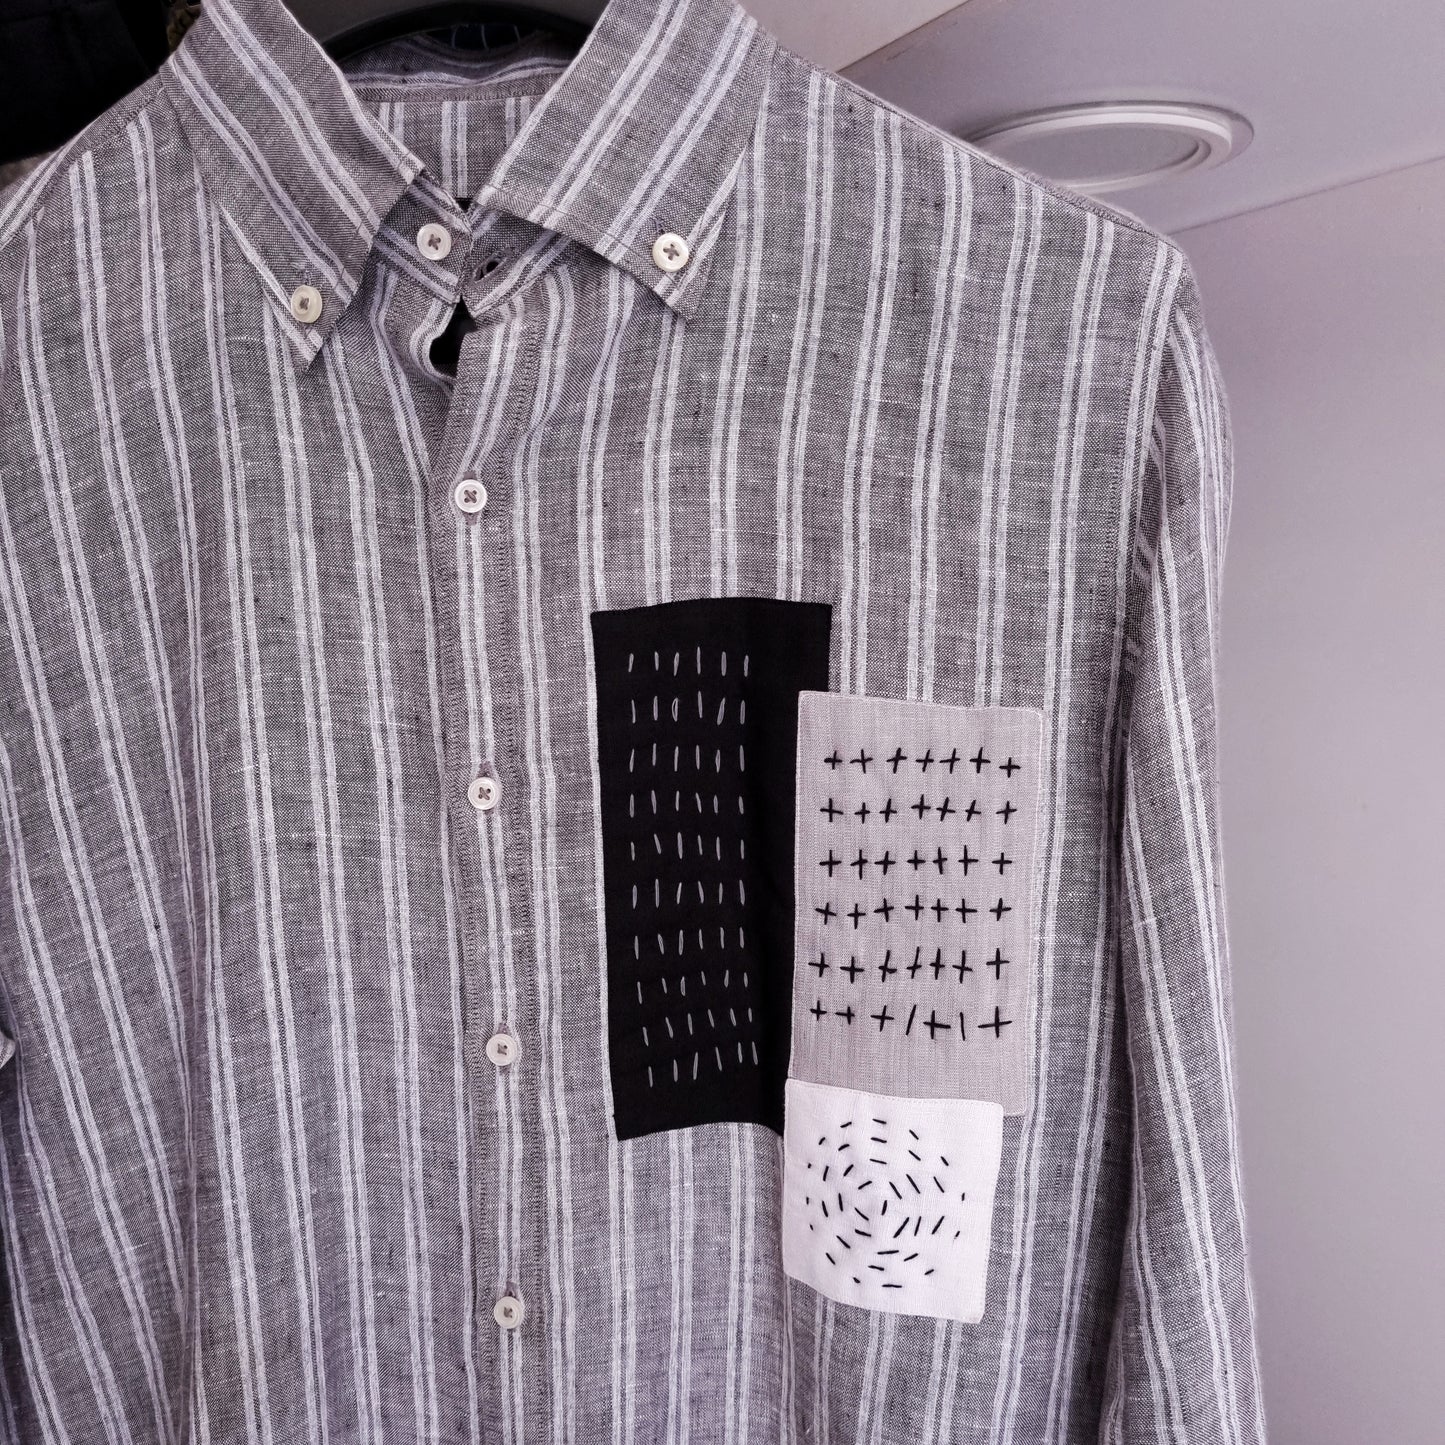 Snug's Patched Linen Shirt - Hand Crafted Elegance